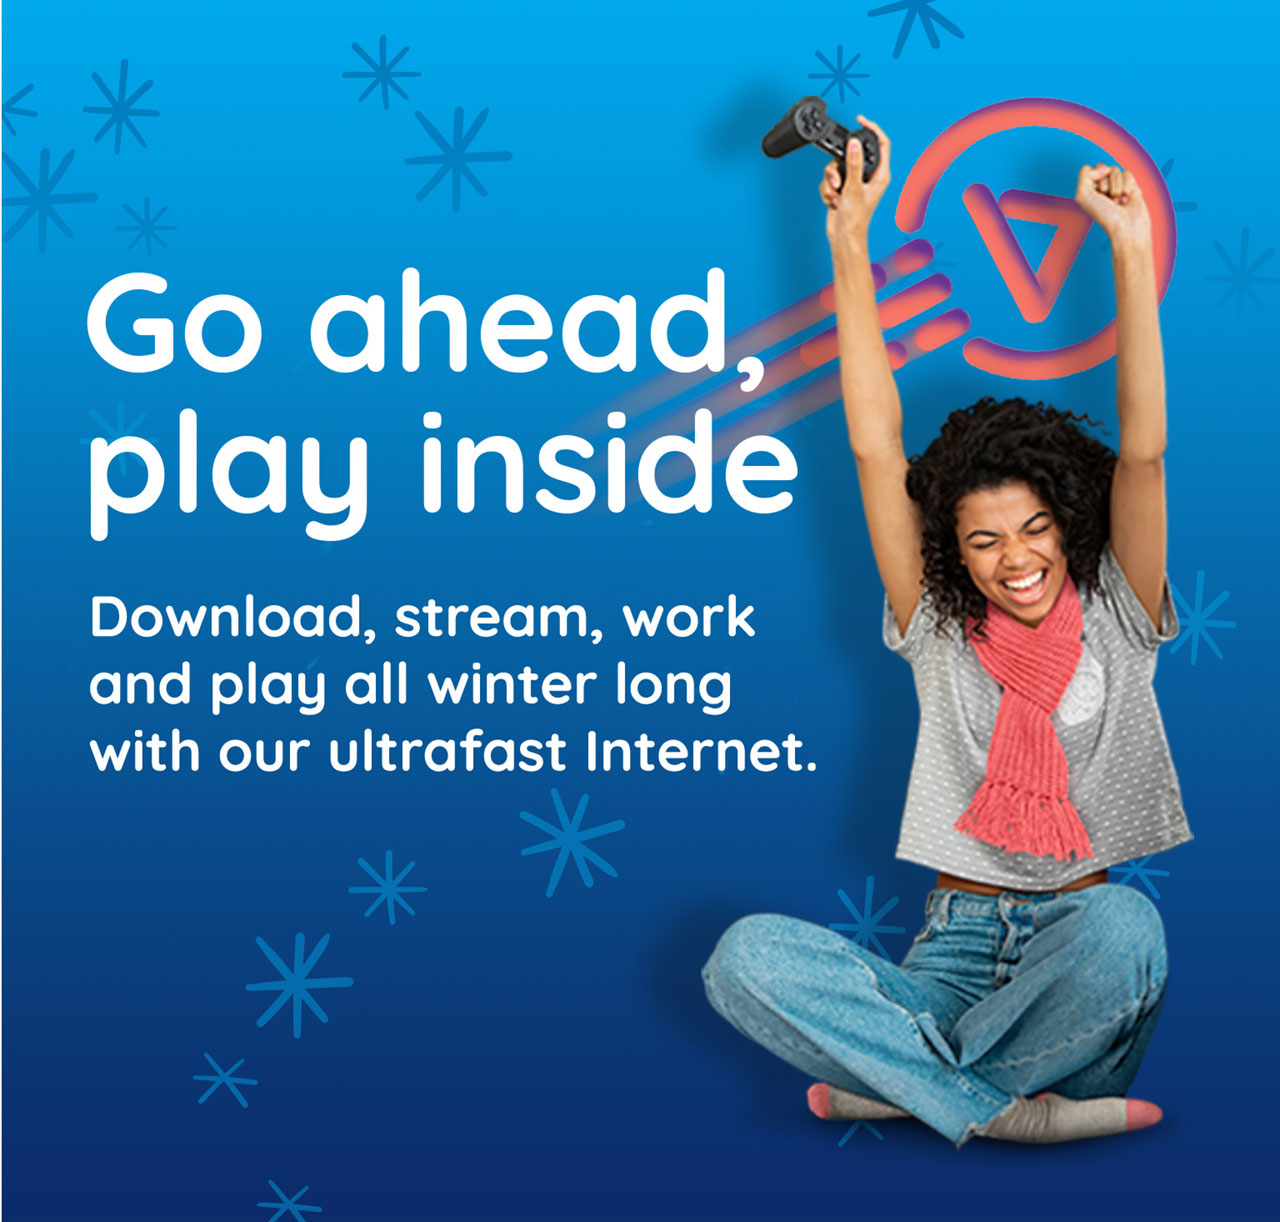 Go ahead, play inside - Download, stream, work and play all winter long with our ultrafast Internet.